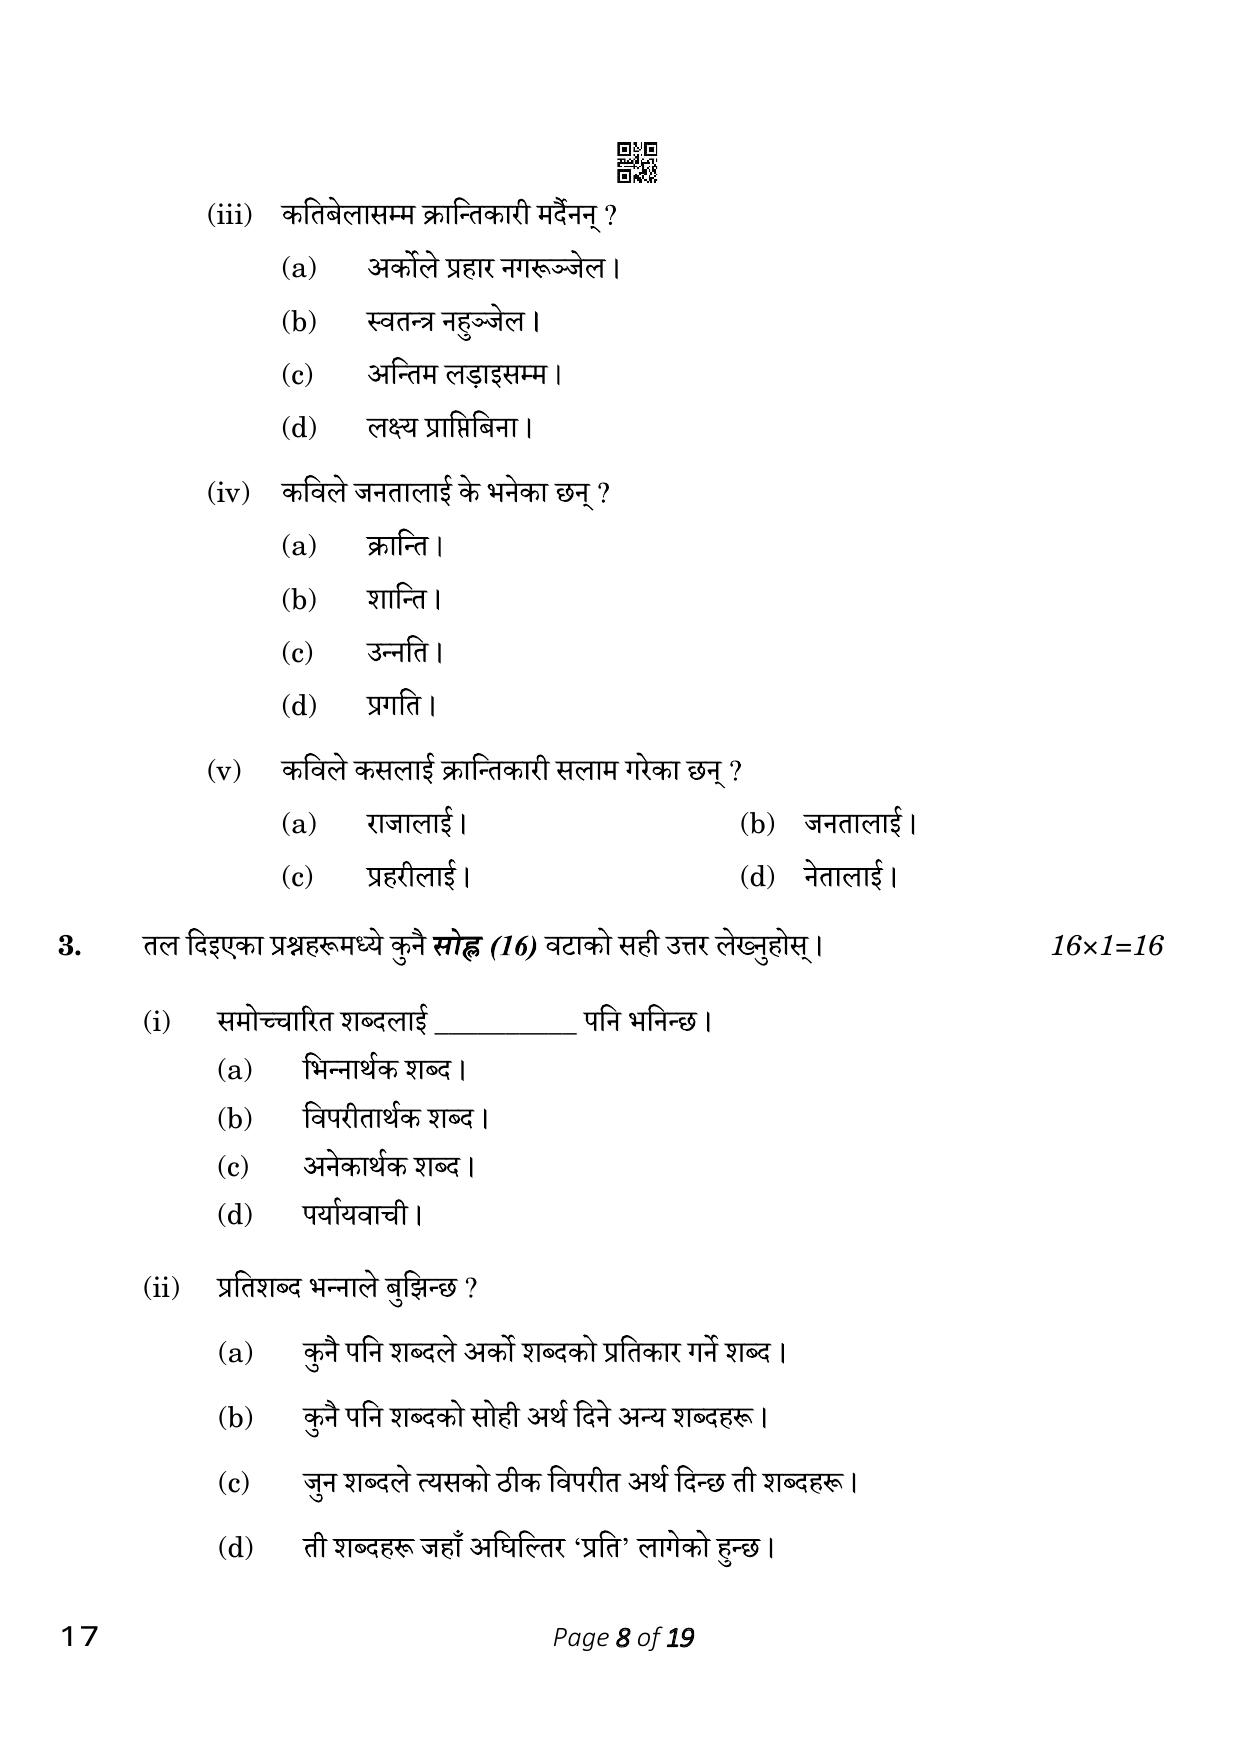 CBSE Class 10 Nepali (Compartment) 2023 Question Paper - Page 8